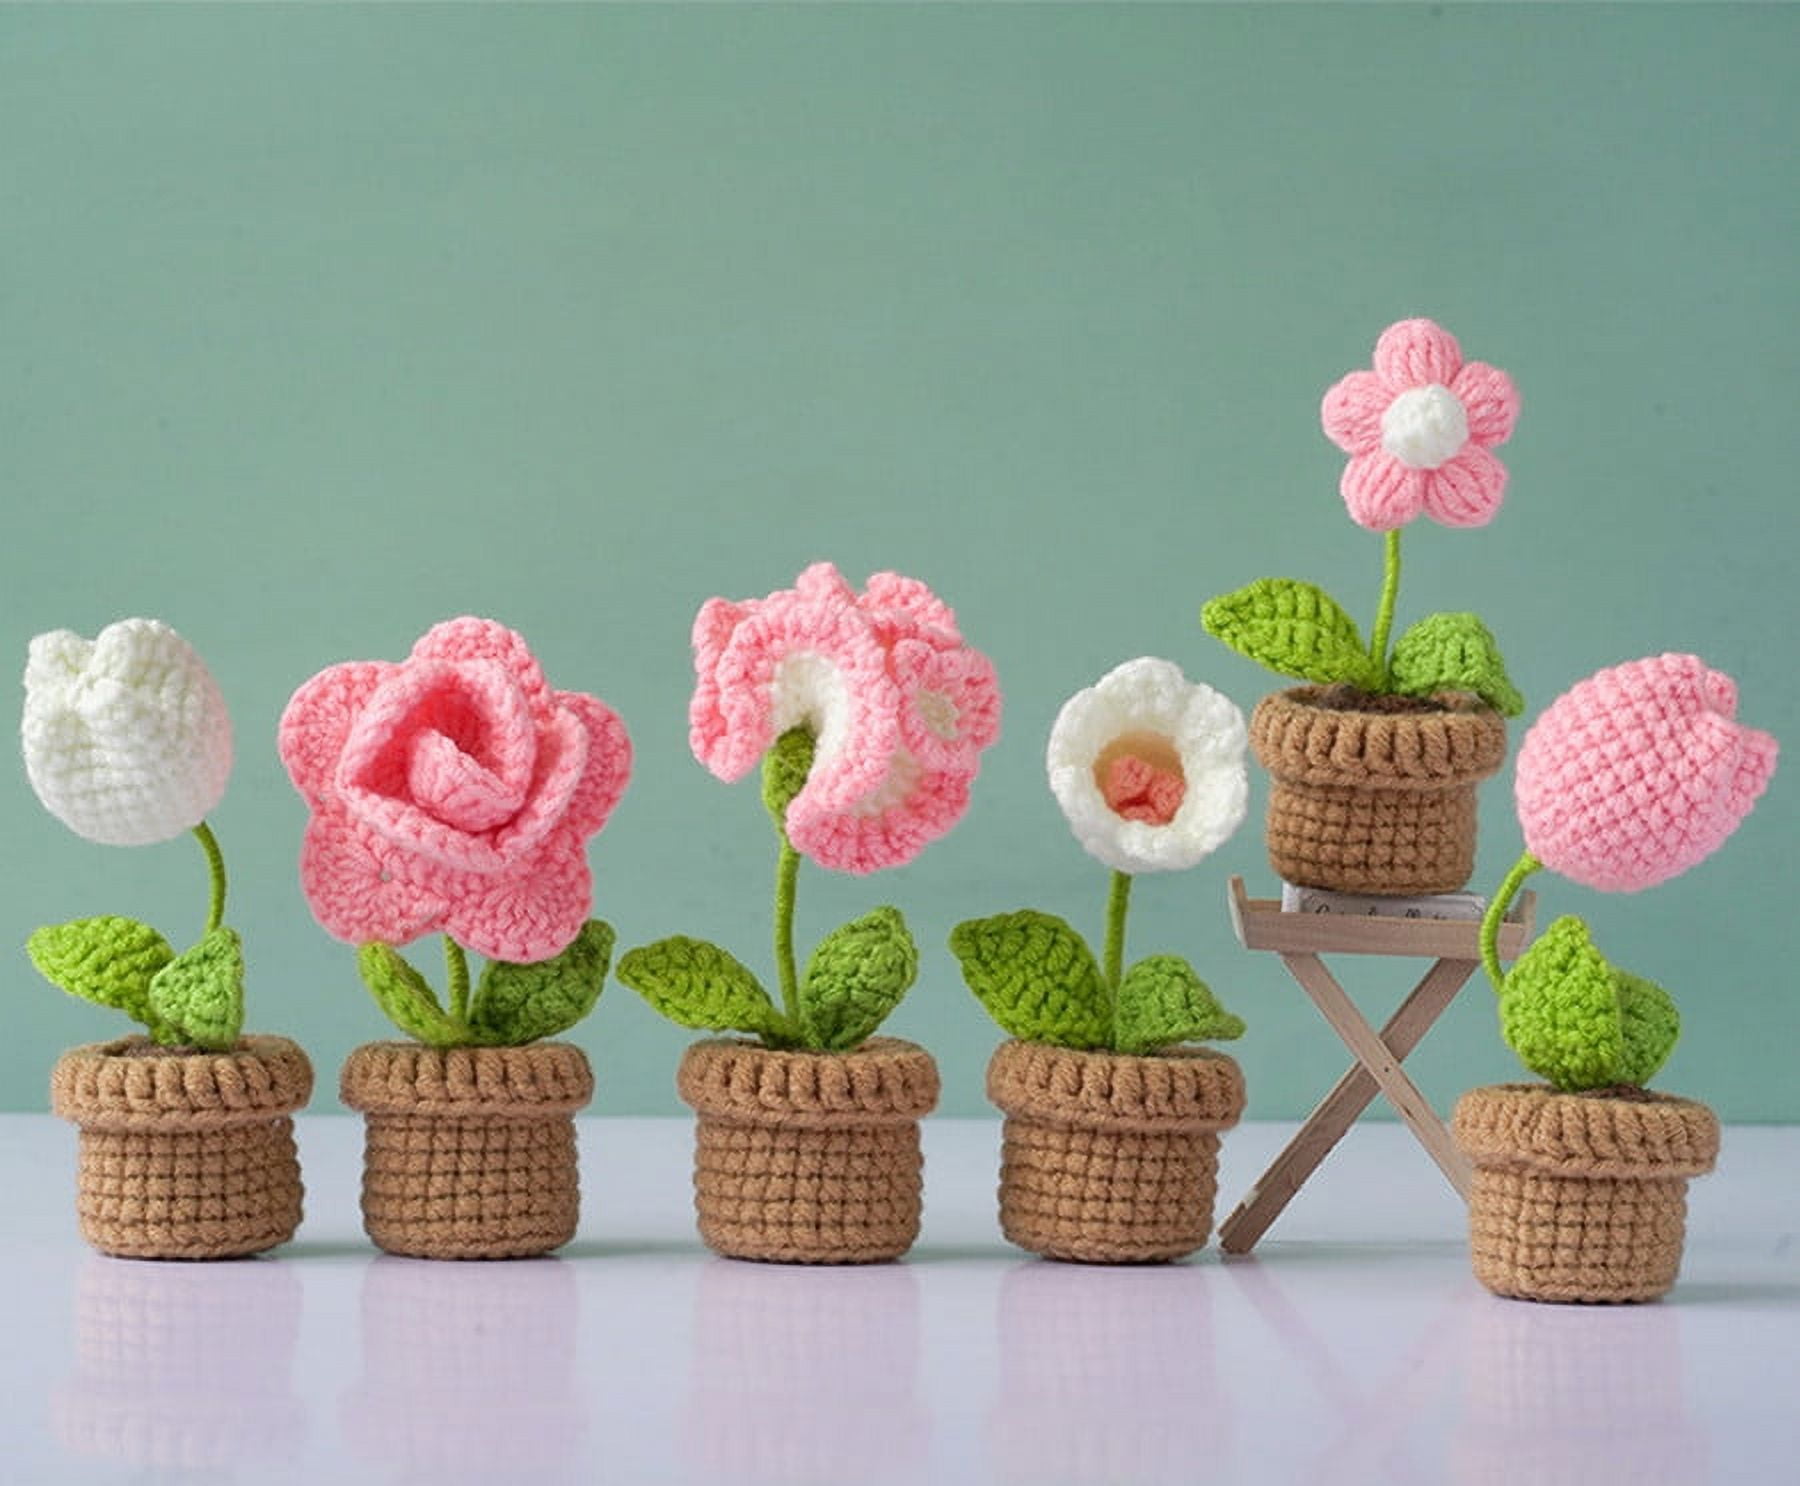 Hesroicy 1 Set Crochet Kit Amazing Easy Crochet with Step-by-Step Video  Tutorials 6 Cute Flowers Uncompleted Knitting Elegant Potted Flowers DIY  Crochet Accessories Craft Shop Accessory 